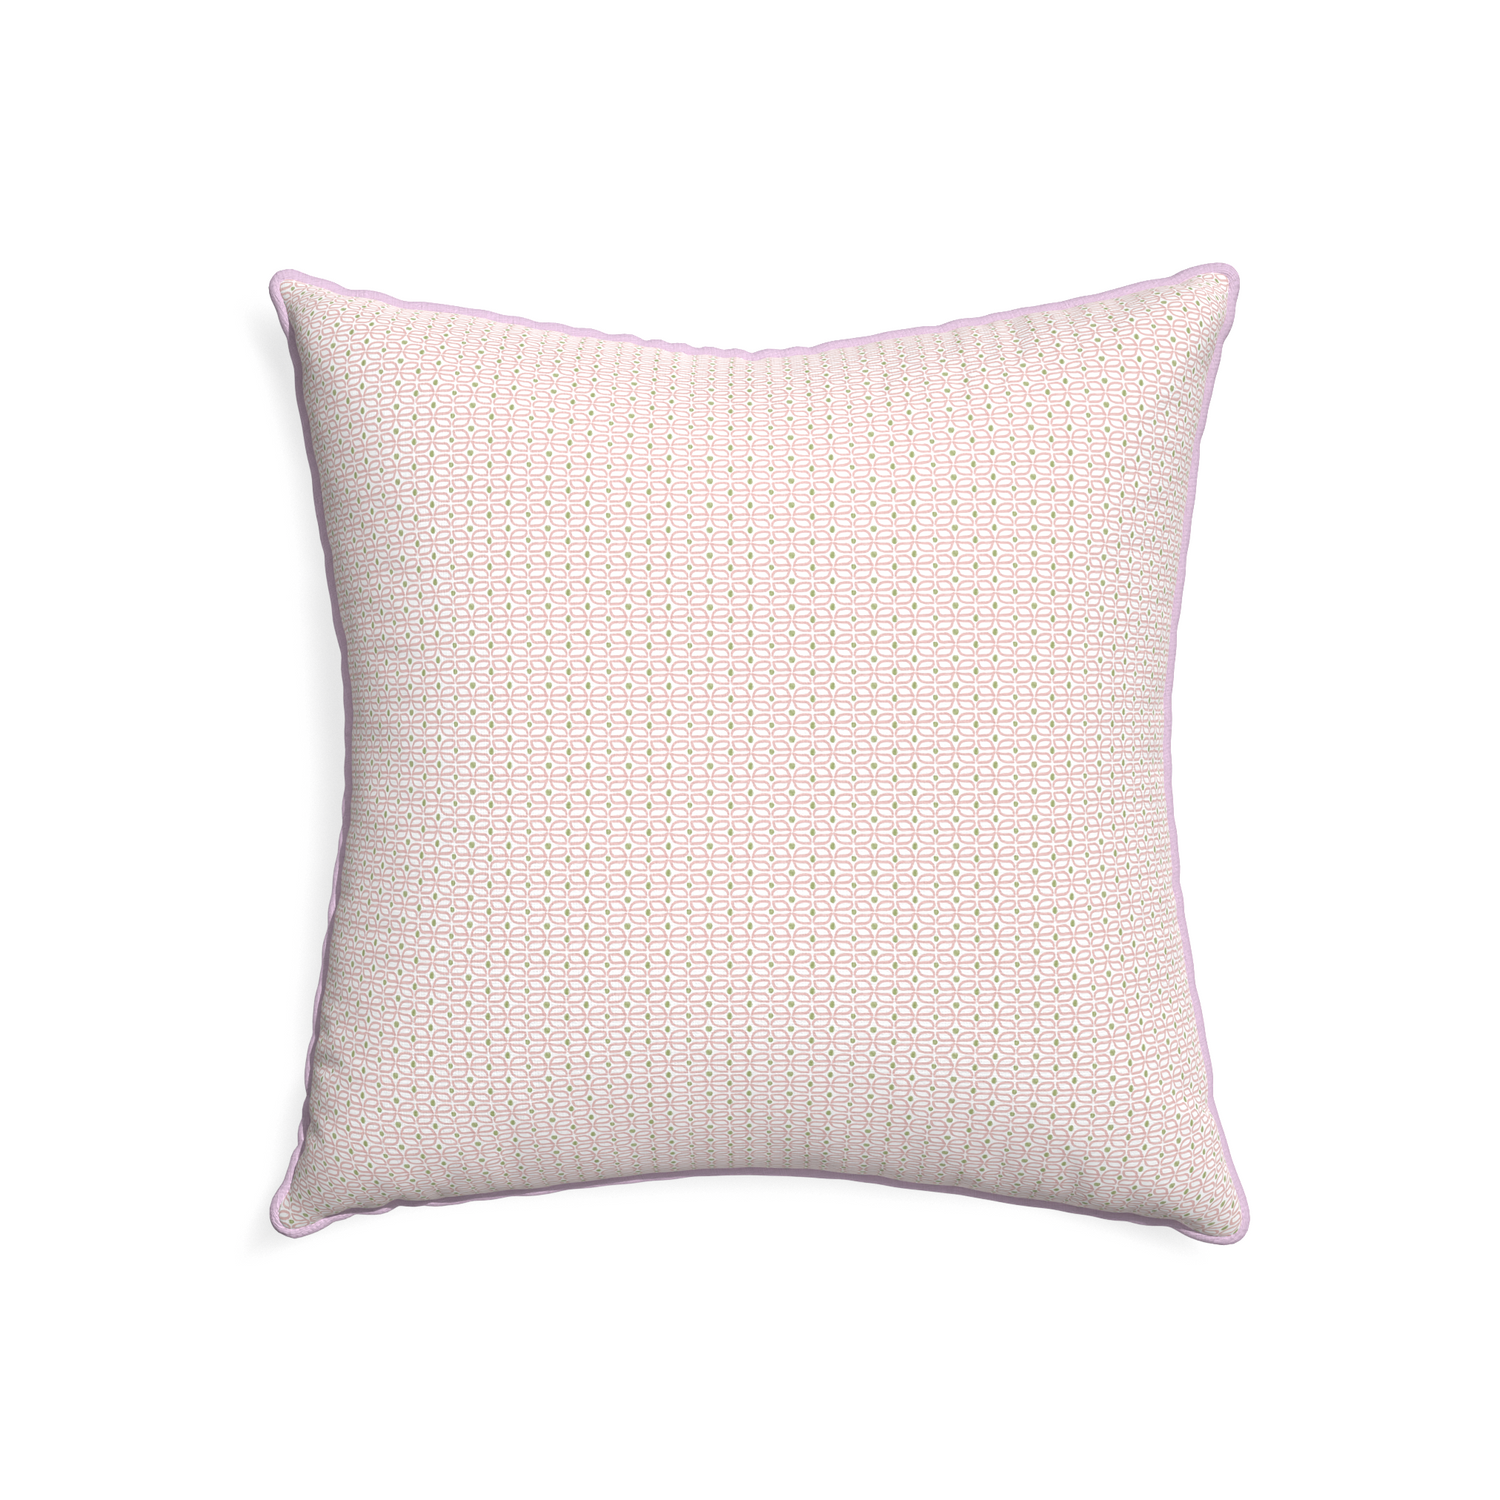 22-square loomi pink custom pink geometricpillow with l piping on white background